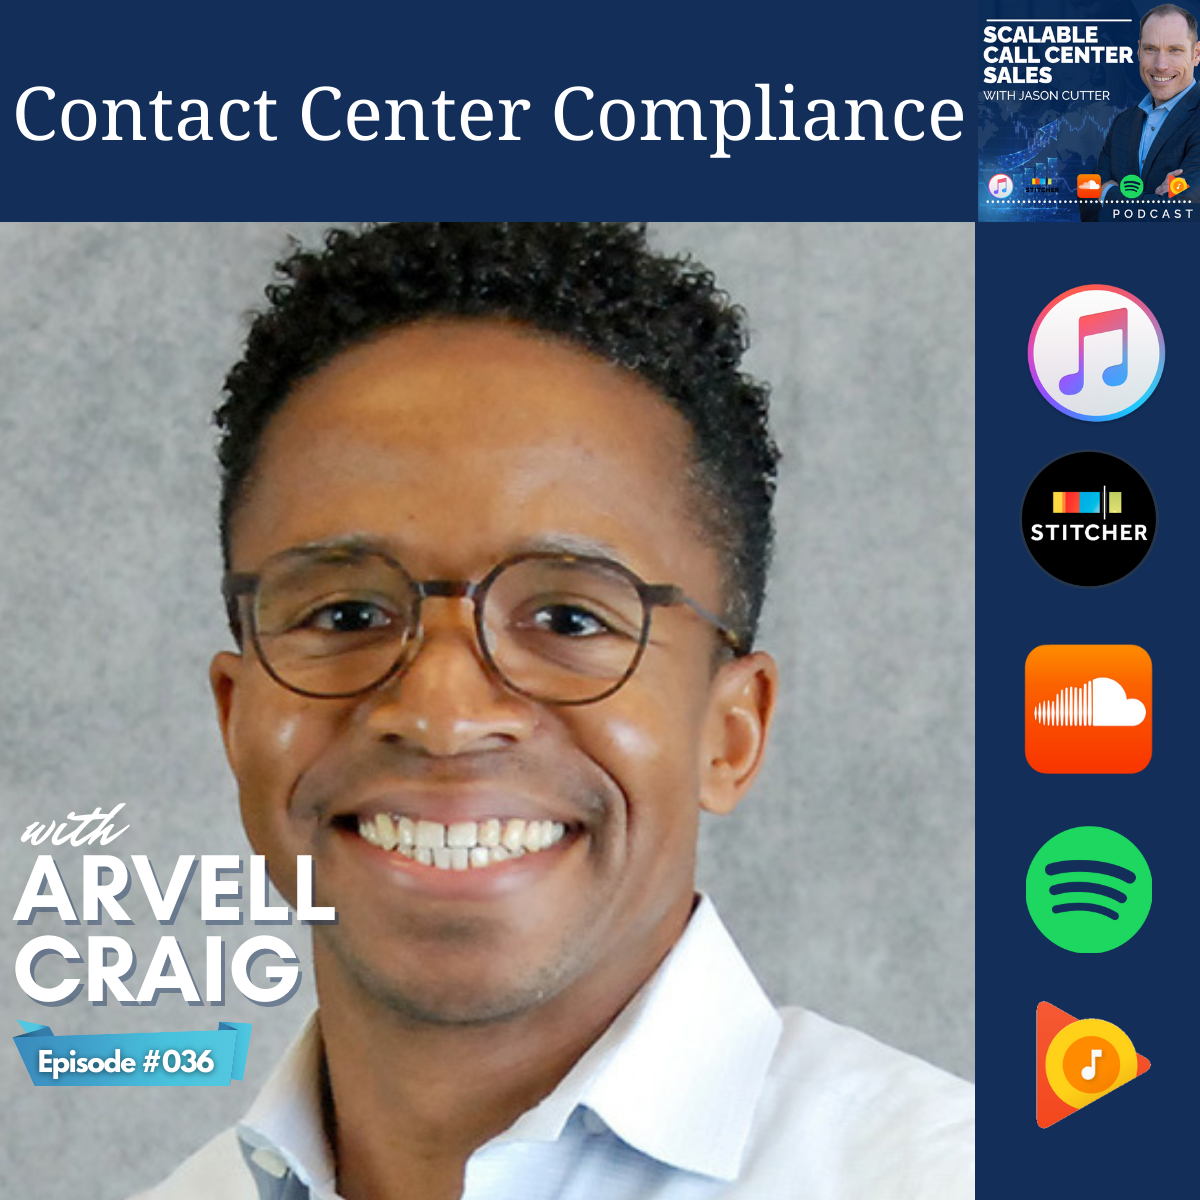 [036] Contact Center Compliance, with Arvell Craig from DNC.com